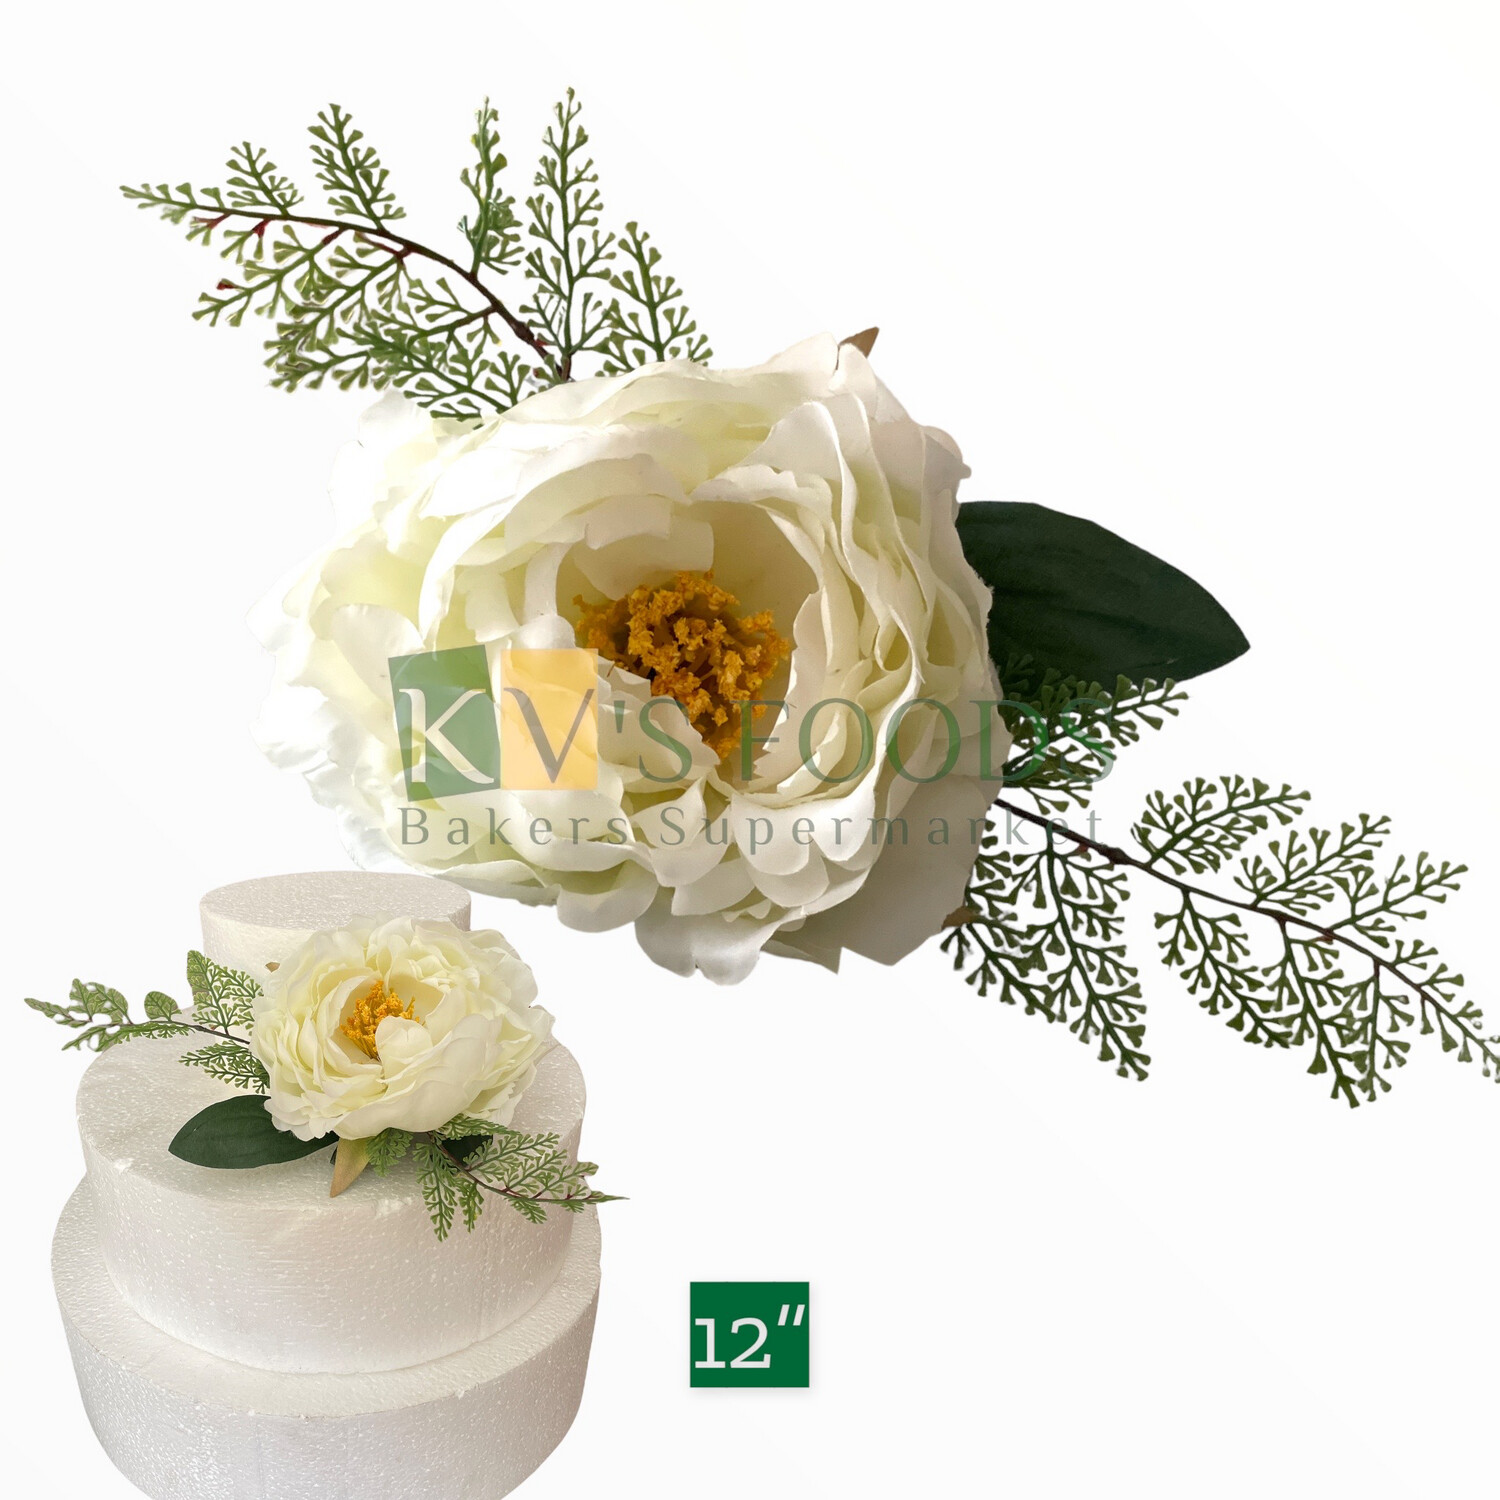 12” Non-edible Artificial Peony Rose Flower With Leaf Bunch for Cake Decoration | Wedding Cake Flower - KV’s FOODS